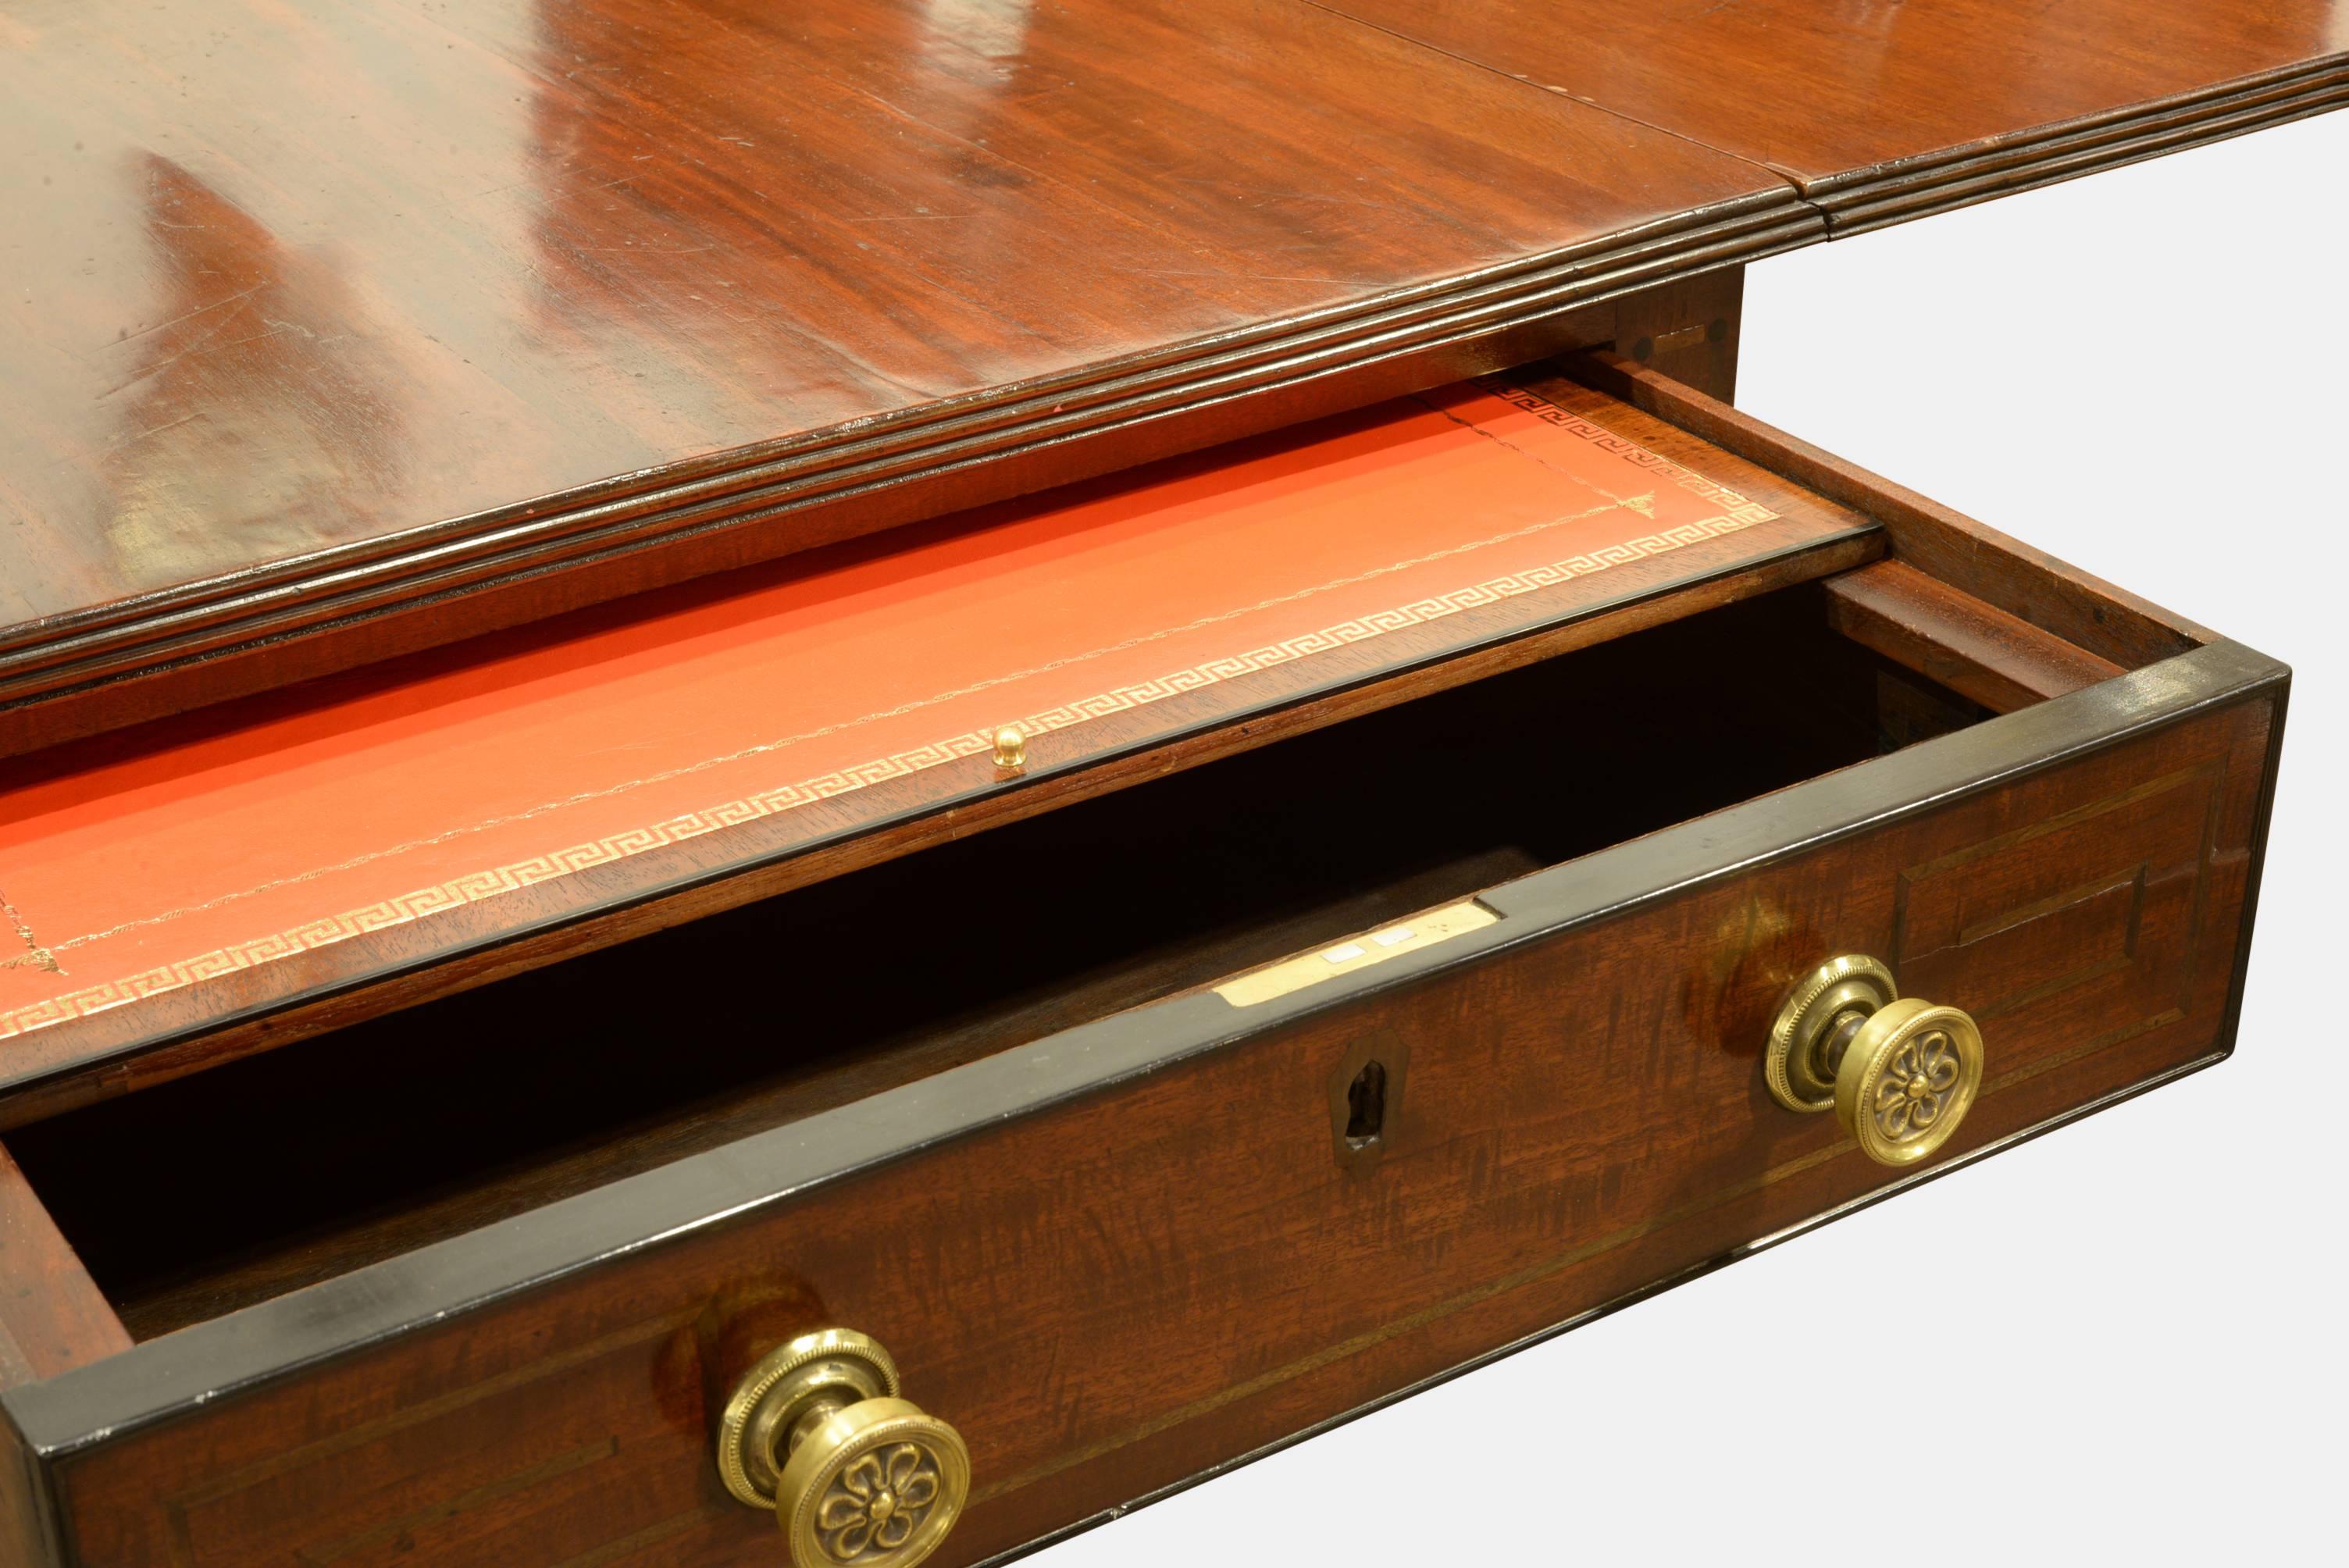 Regency mahogany Pembroke library table with writing slide and pen drawer.

Measures: 70cm (27.6